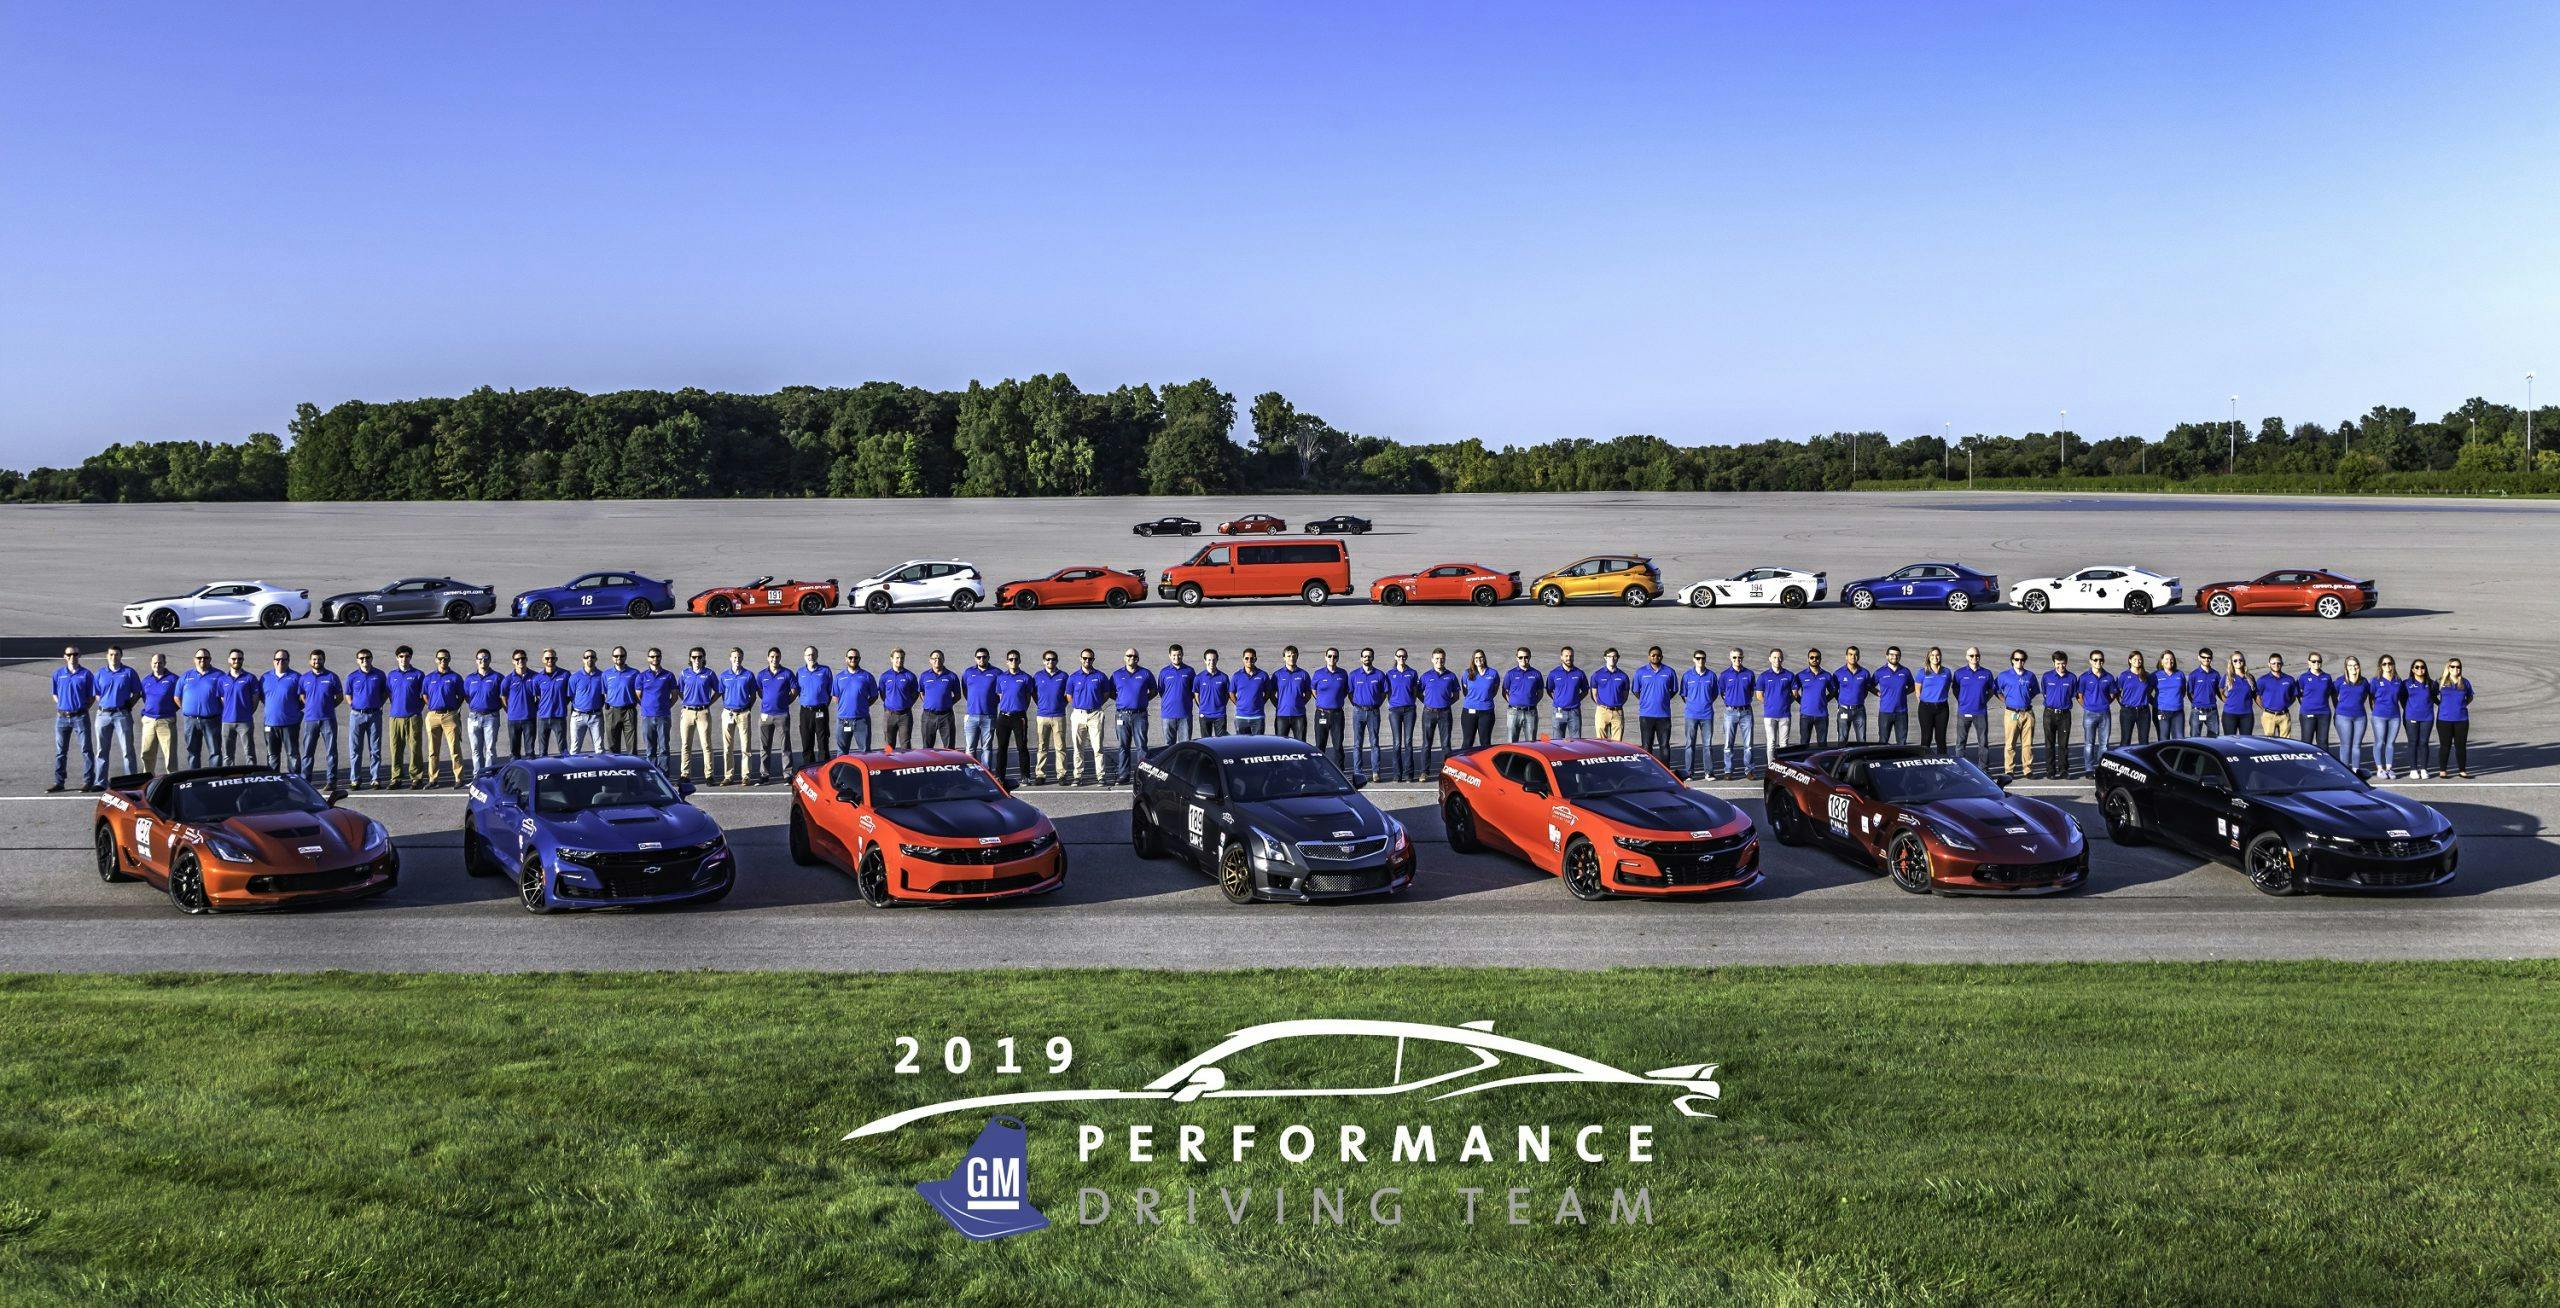 GM Performance driving team group